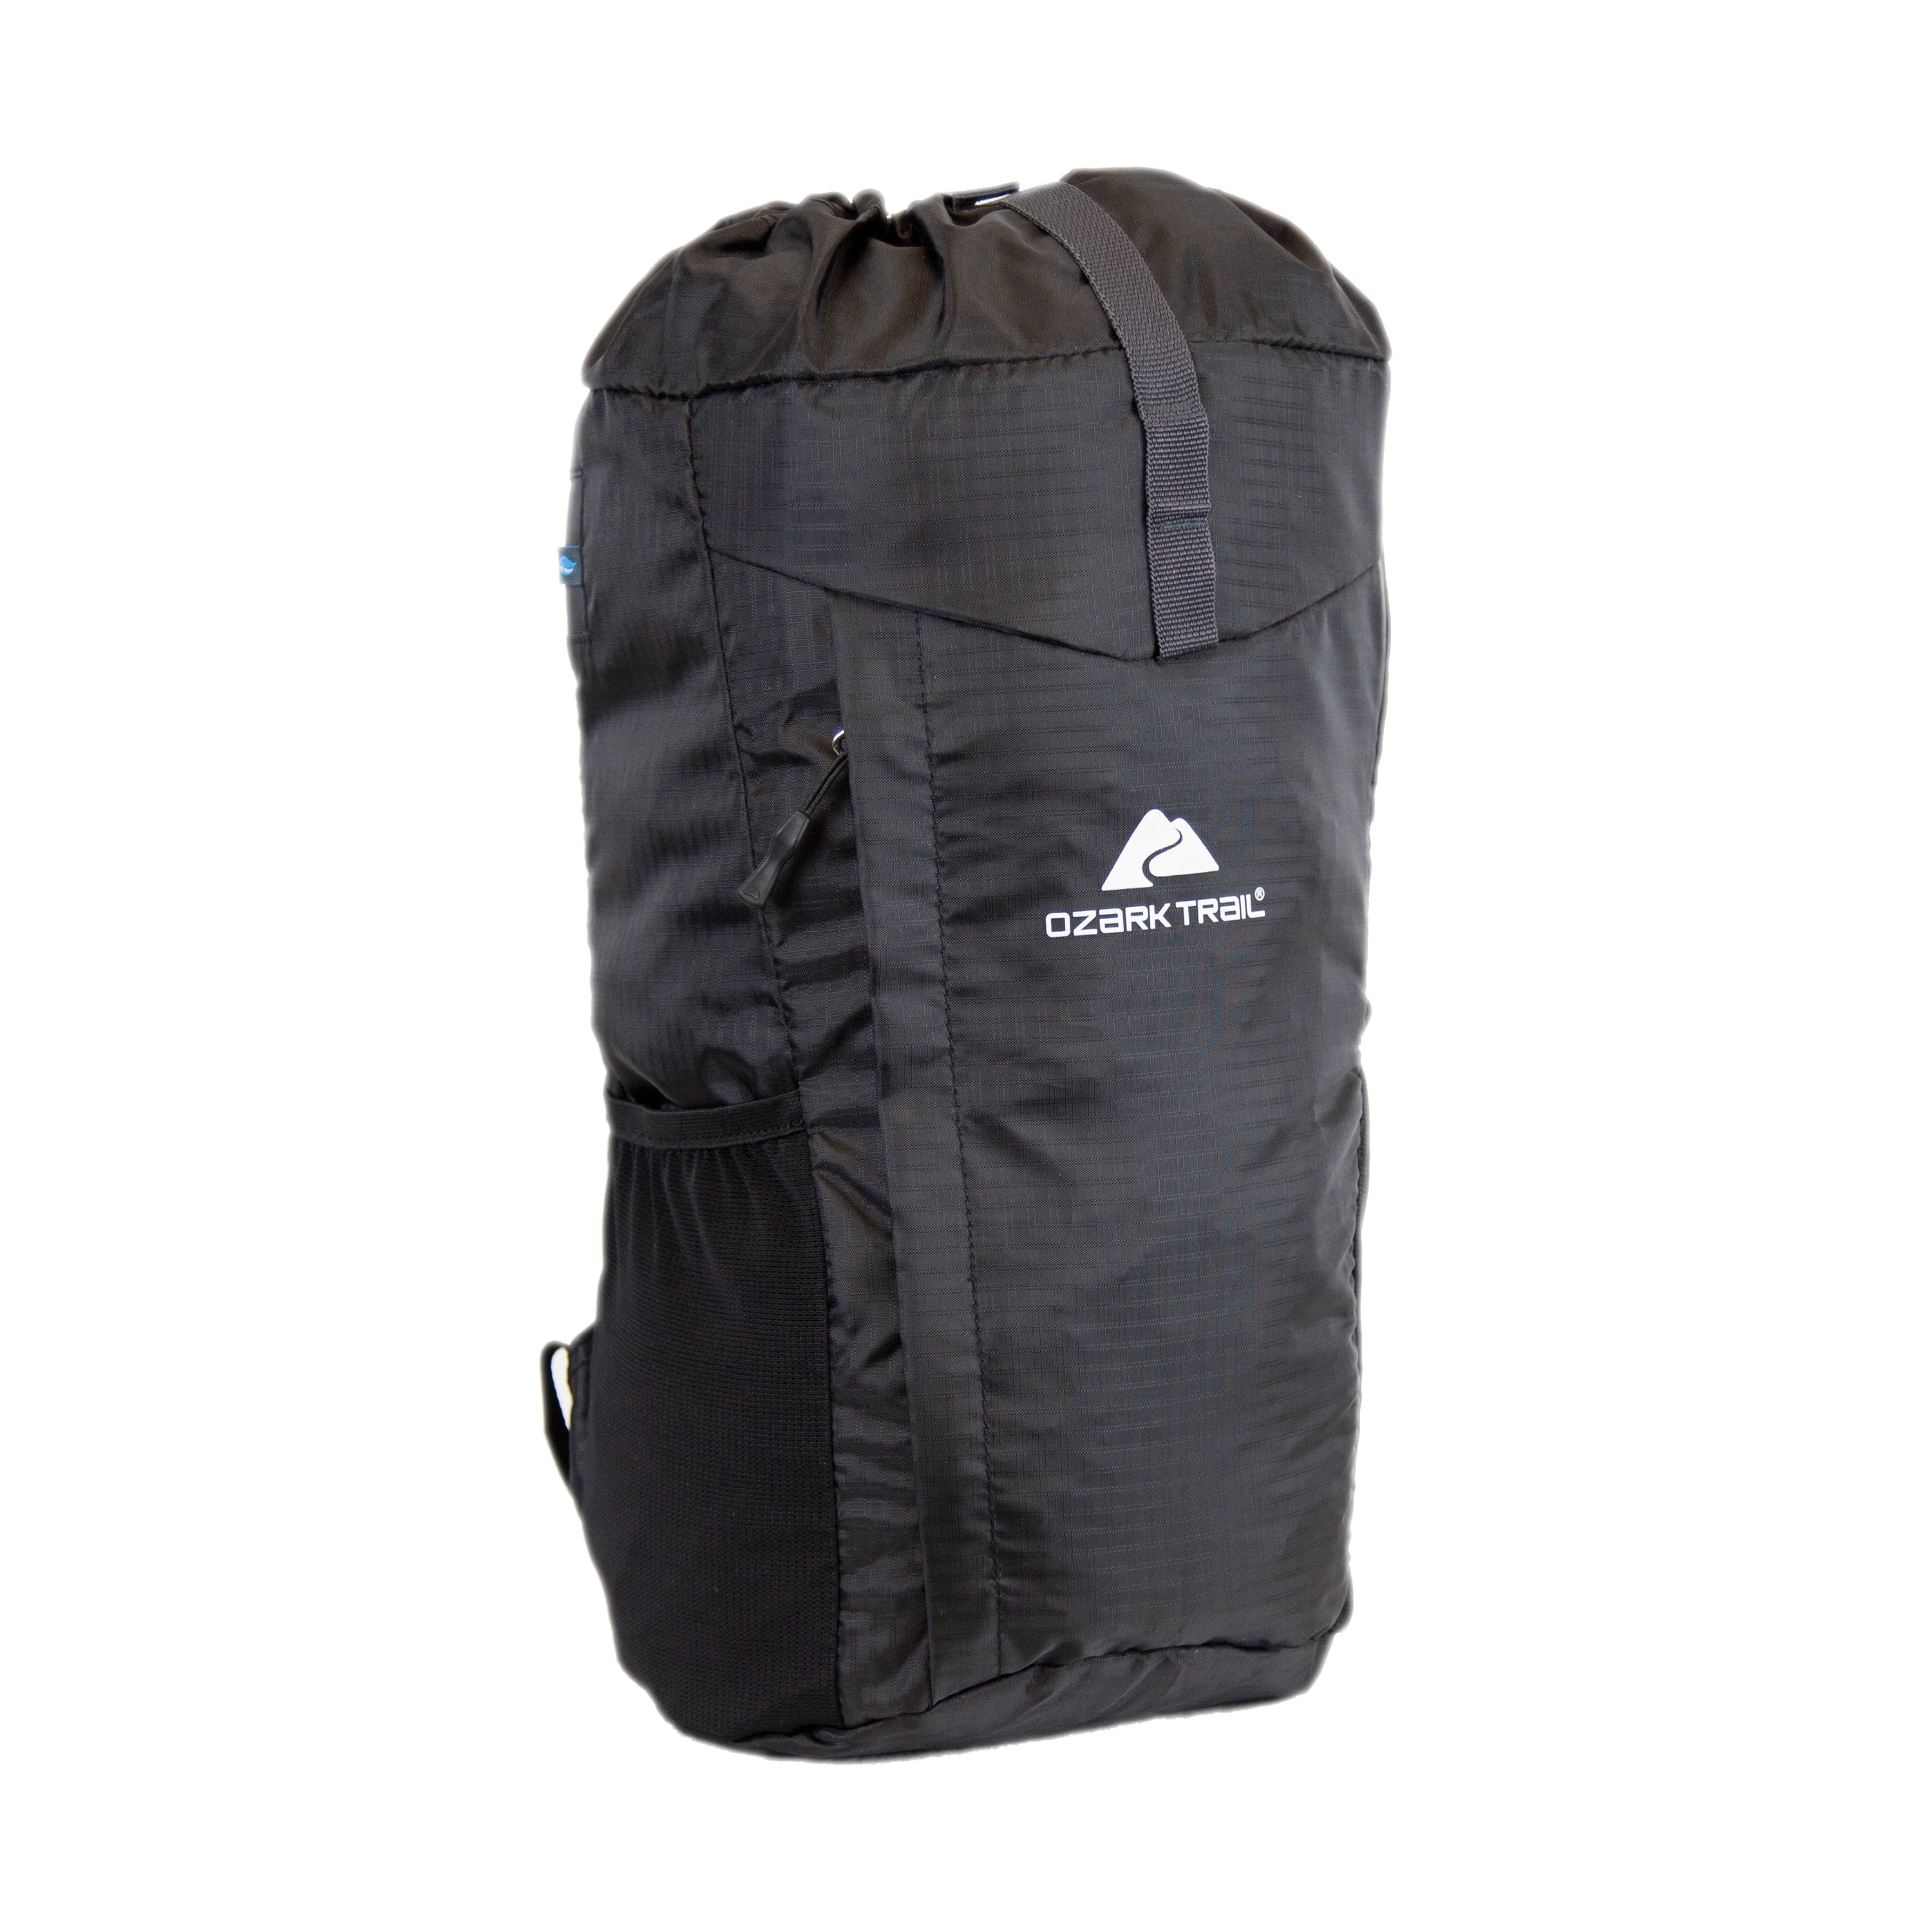 Ozark Trail 20L Corsicana Roll-Top Backpack, Hydration-Compatible, Black